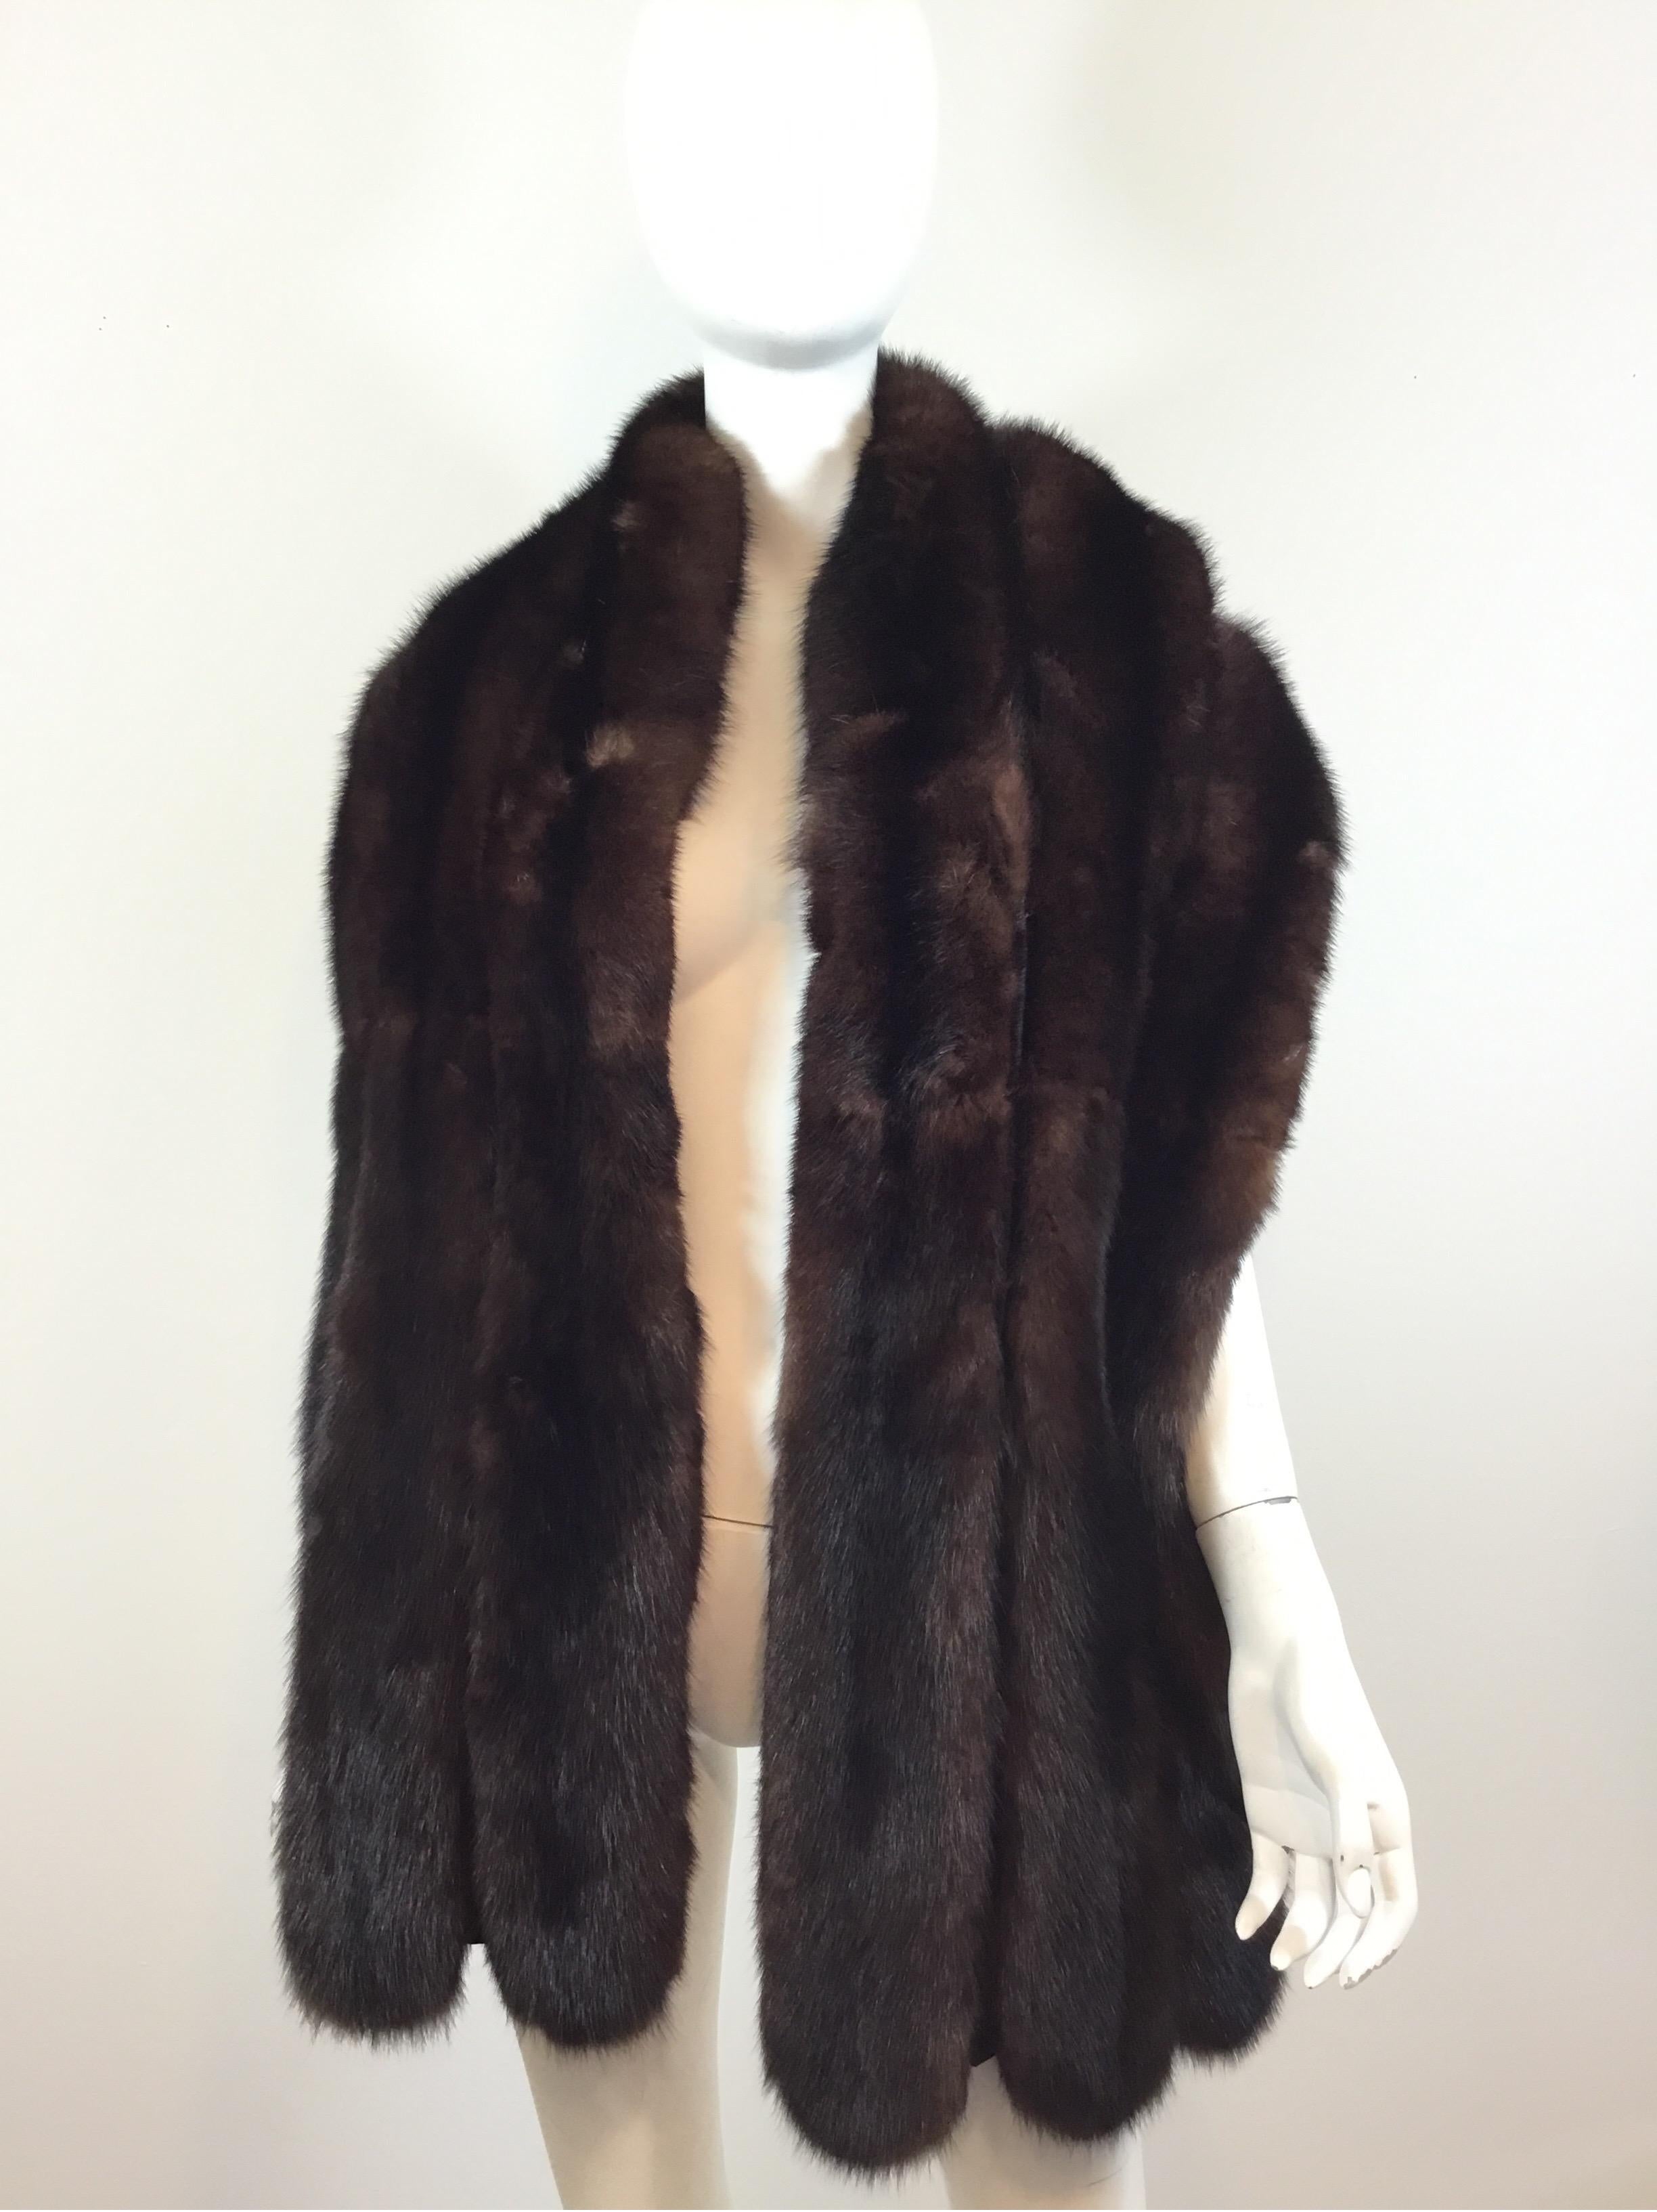 Sable Fur Shawl featured in brown with a scalloped hem and full lining. Shawl is approximately 73 inches long and 12 inches wide. Excellent condition. 